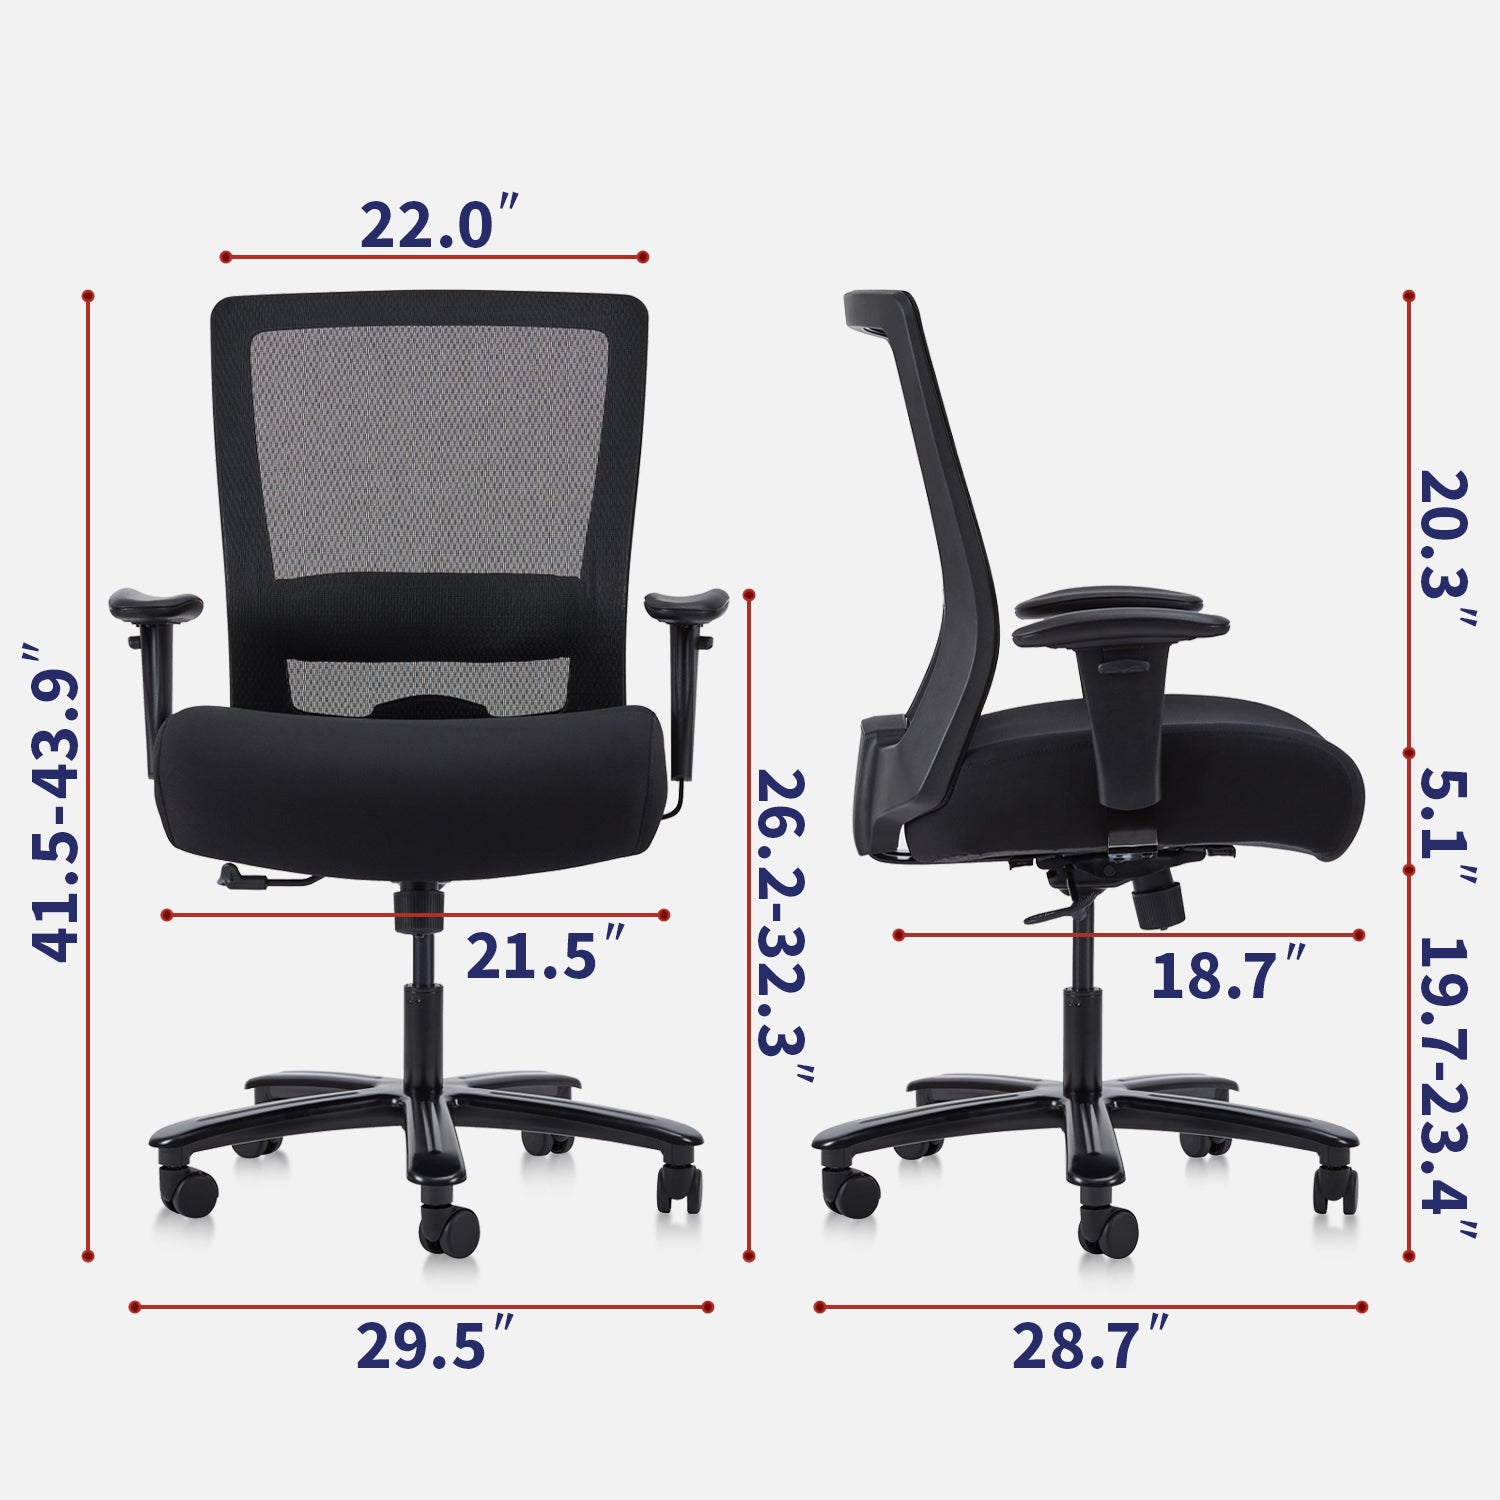 CLATINA Big and Tall Executive Chair Ergonomic with 400lbs High Capacity and Lumbar Support for Home Office Black 1 Pack BIFMA Certification No.5.11